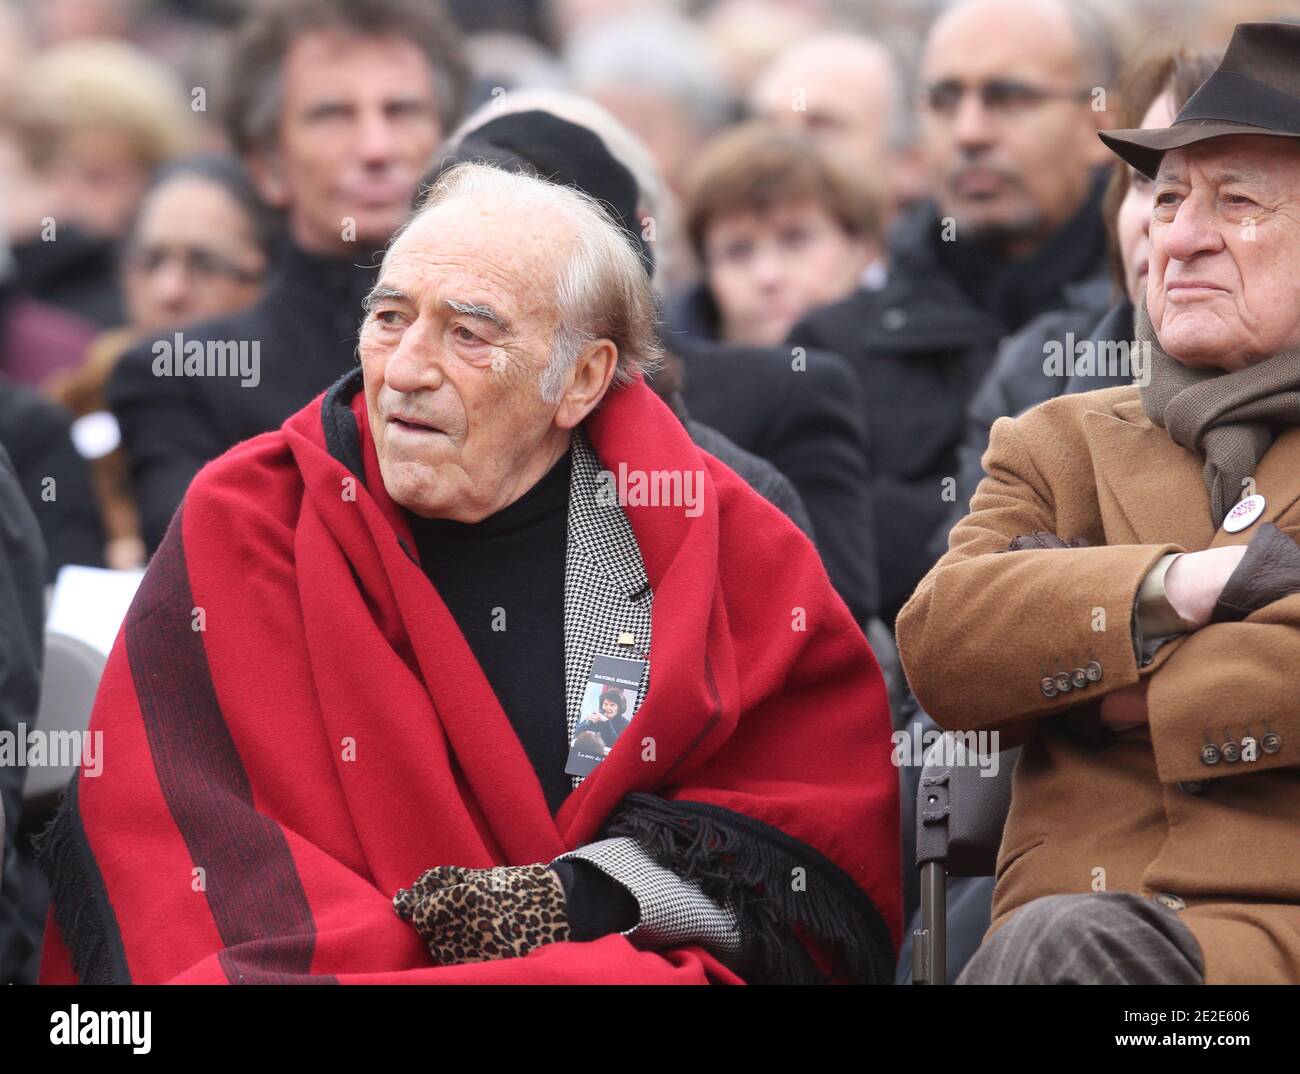 Miguel Angel Estrella and Pïerre Berge attending the funeral of Danielle Mitterrand on November 26, 2011 in Cluny, France. Danielle Mitterrand, First lady of France between 1981 and 1995 and human rights campaigner died in Paris on November 22, 2011. Photo by Vincent Dargent/ABACAPRESS.COM Stock Photo